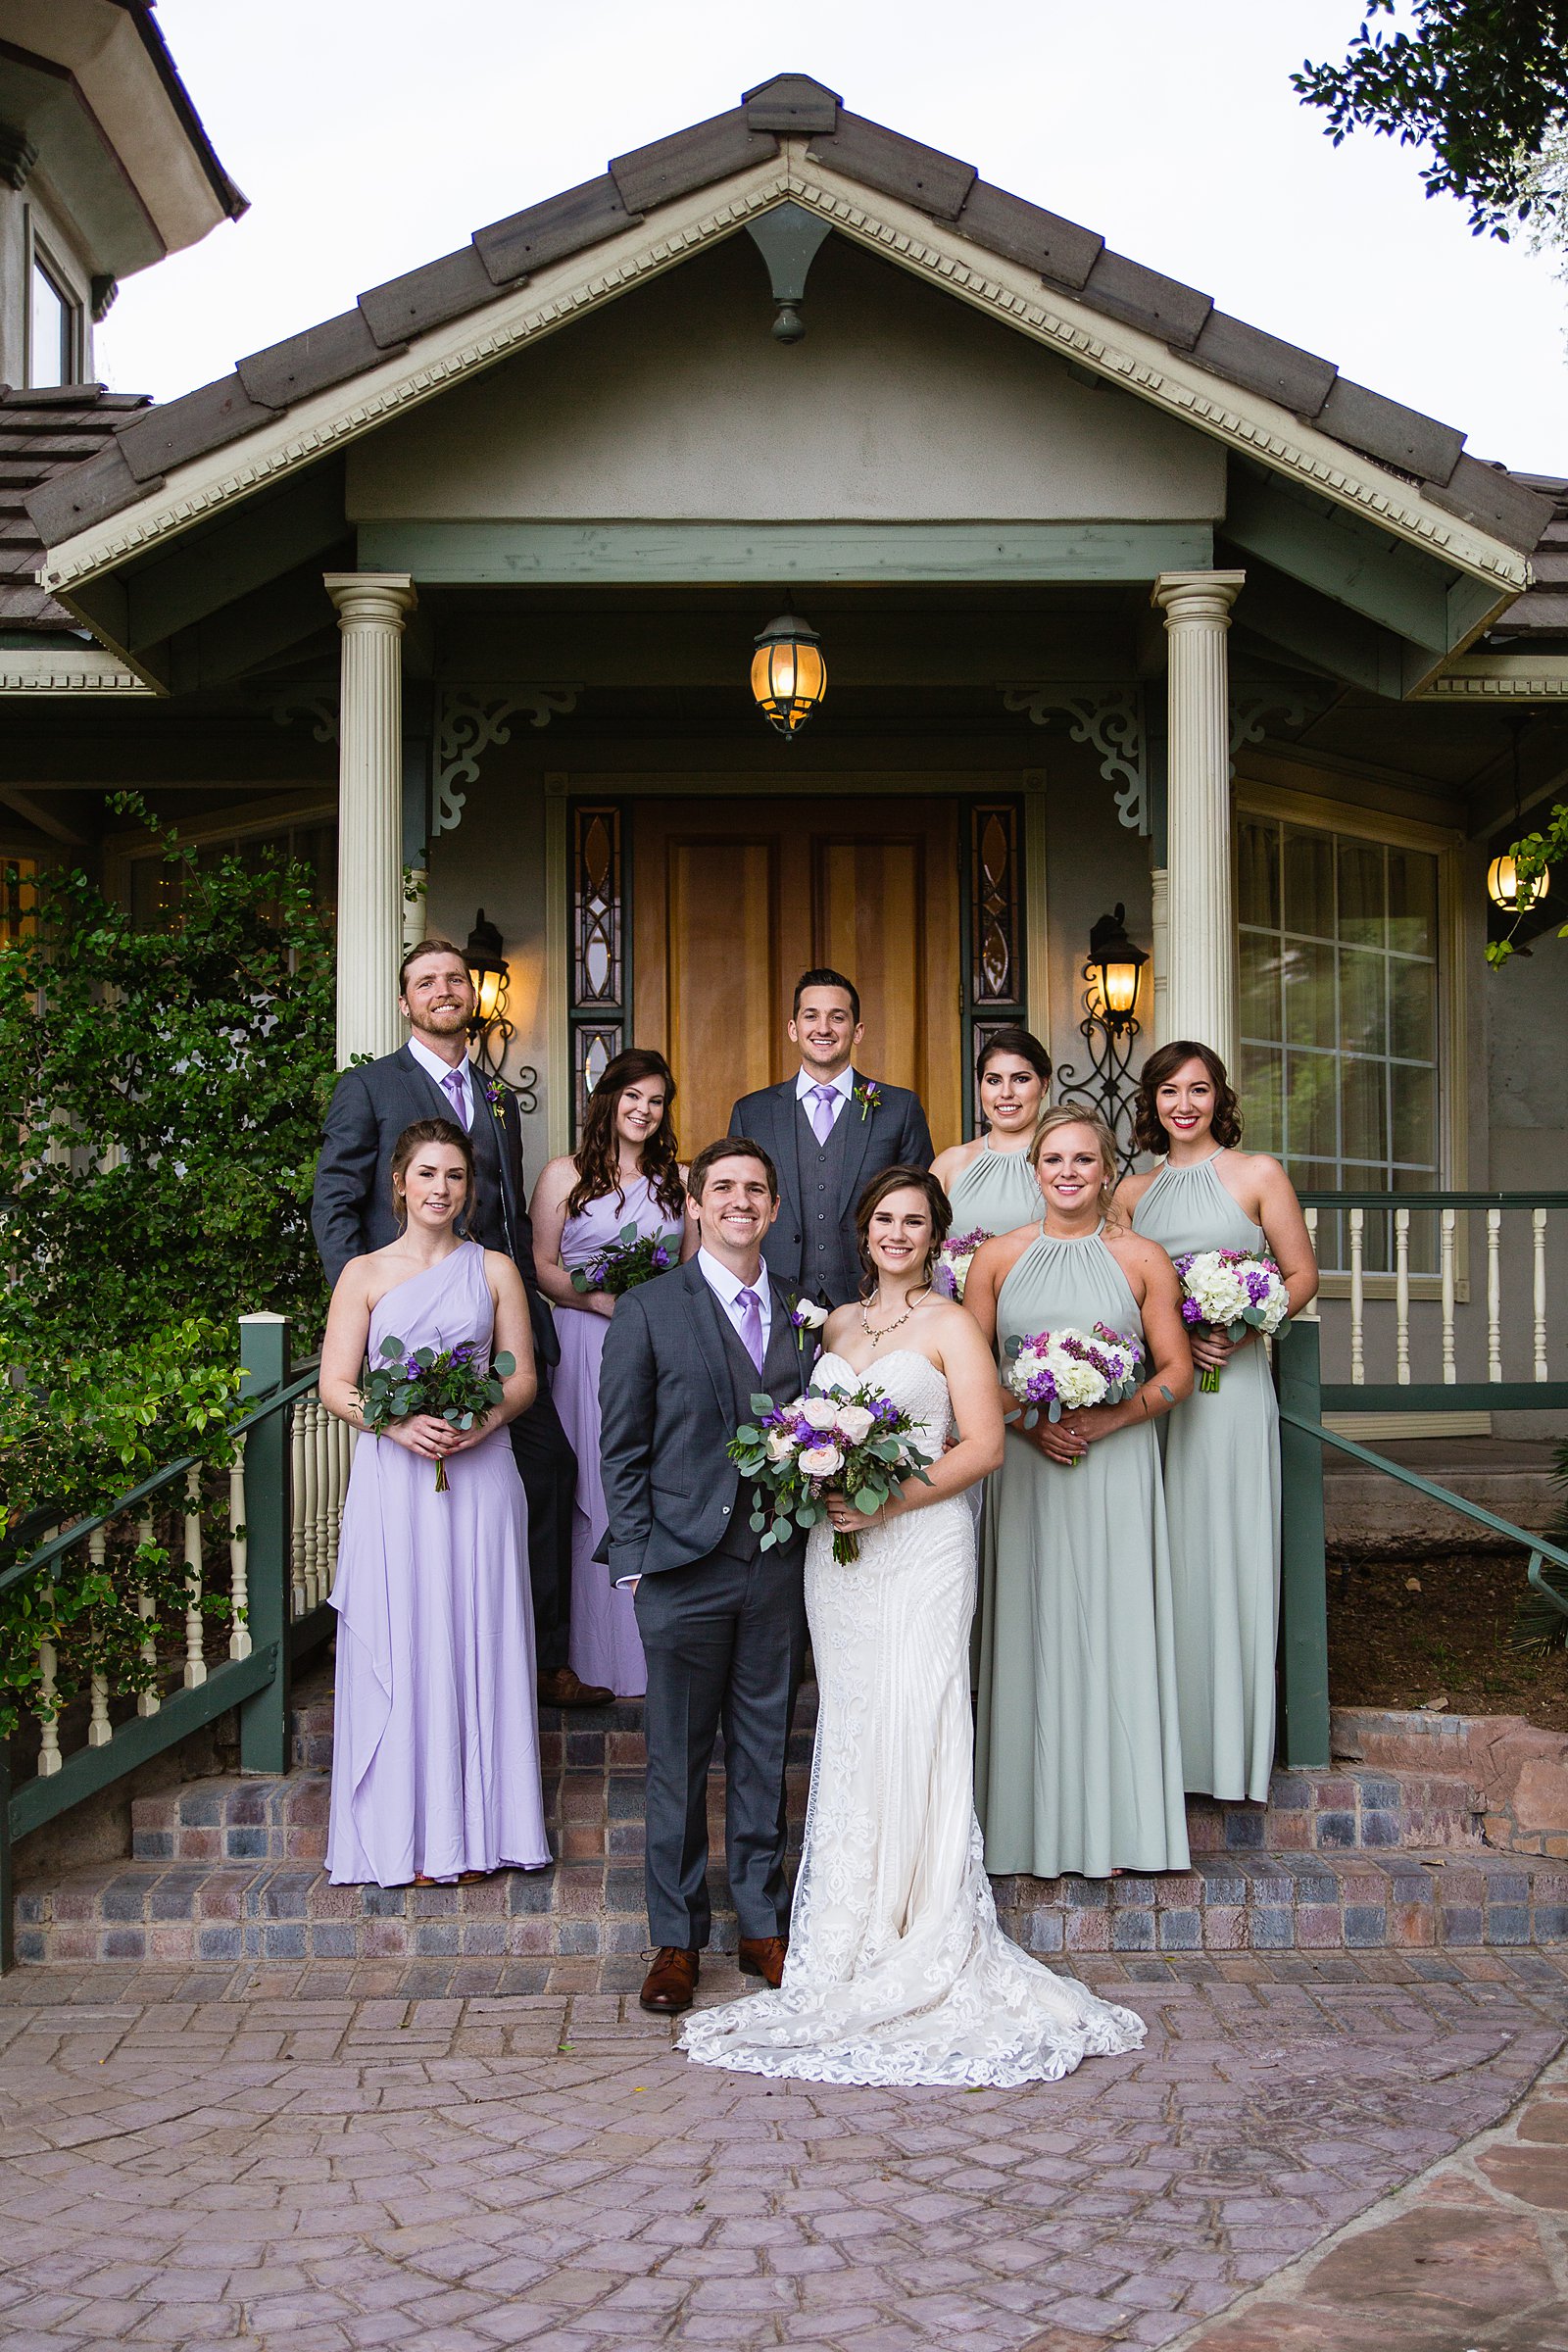 Mixed gender bridal party together at a The Wright House wedding by Arizona wedding photographer PMA Photography.